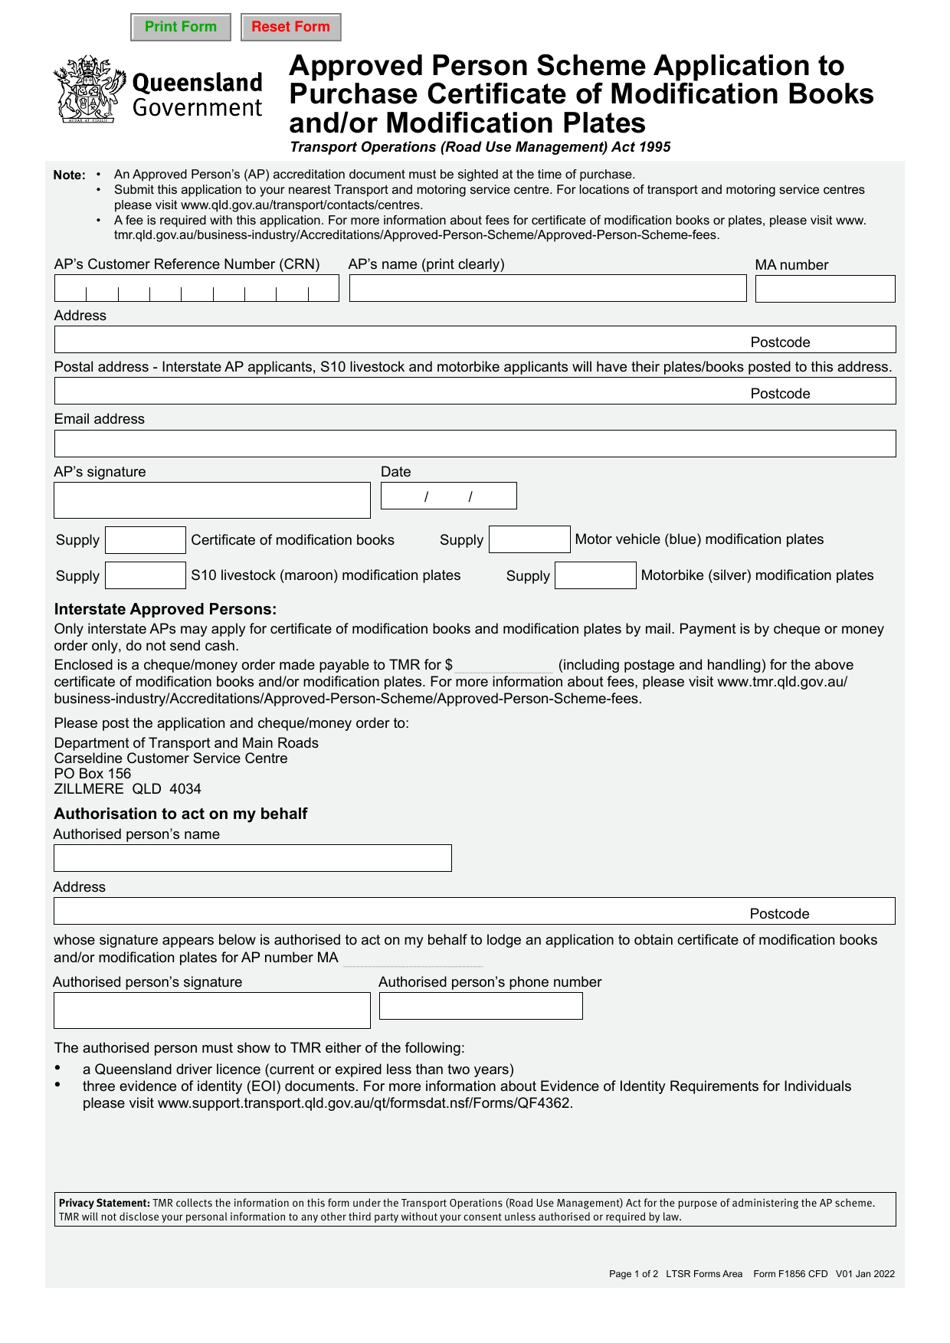 Form F1856 Approved Person Scheme Application to Purchase Certificate of Modification Books and / or Modification Plates - Queensland, Australia, Page 1